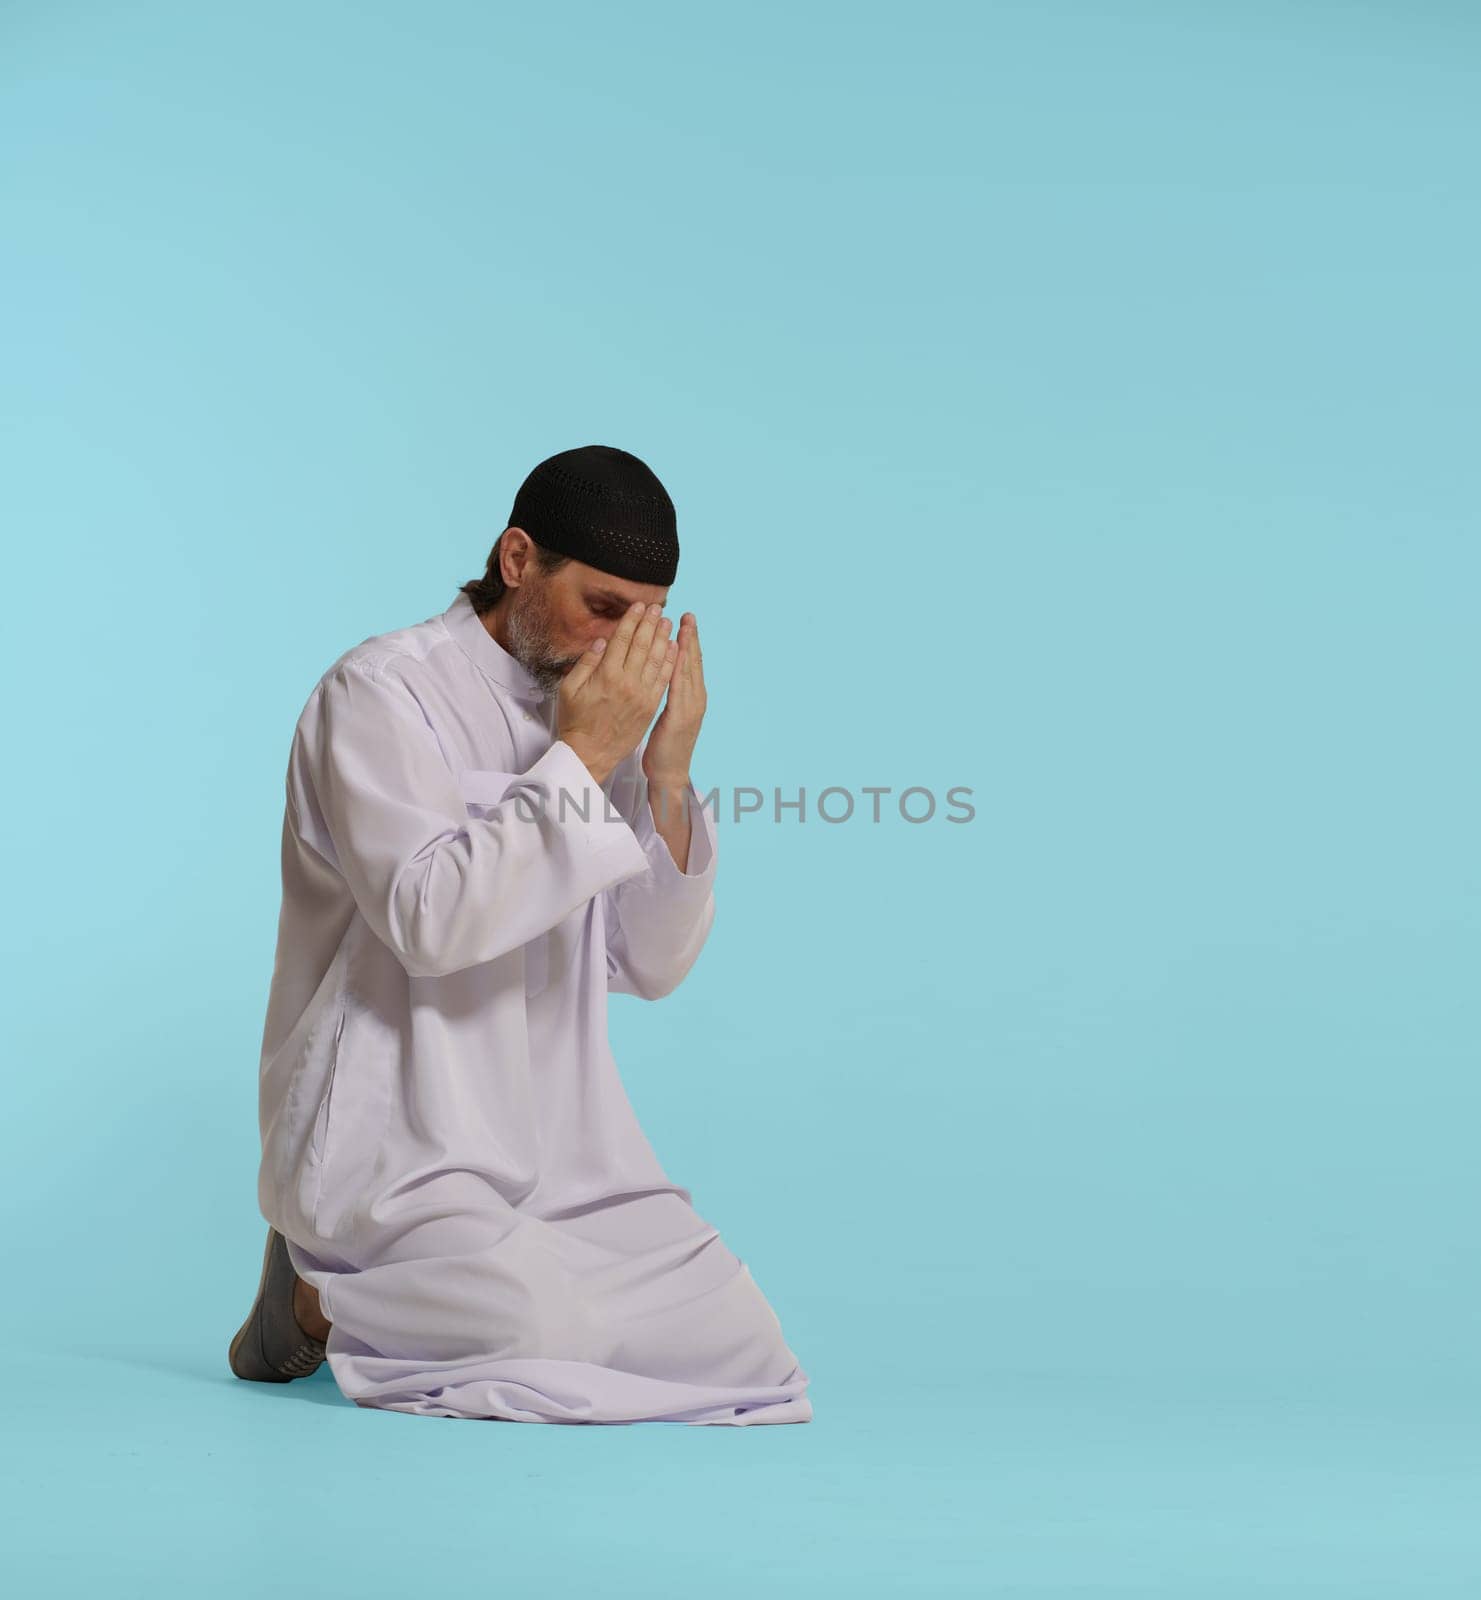 devout Muslim man kneels in pray, hands covering face in act of Namaz, fundamental Islamic ritual. Isolated against blue background. Faith, spirituality, and devotion in practice of Islamic prayer. by LipikStockMedia